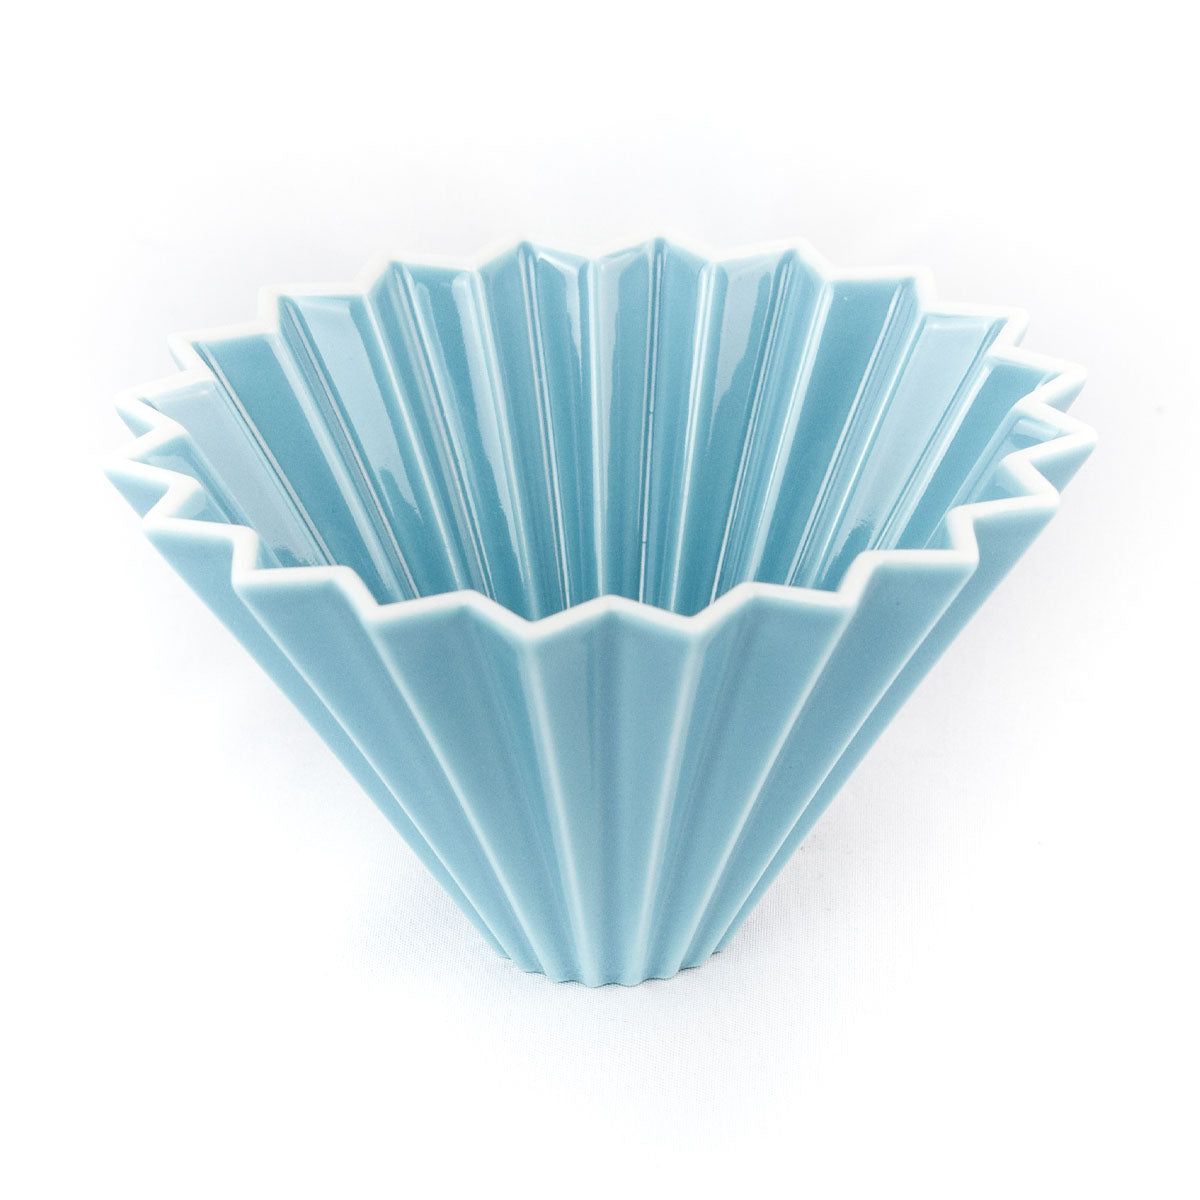 Blue Origami dripper, made in Japan with Mino porcelain